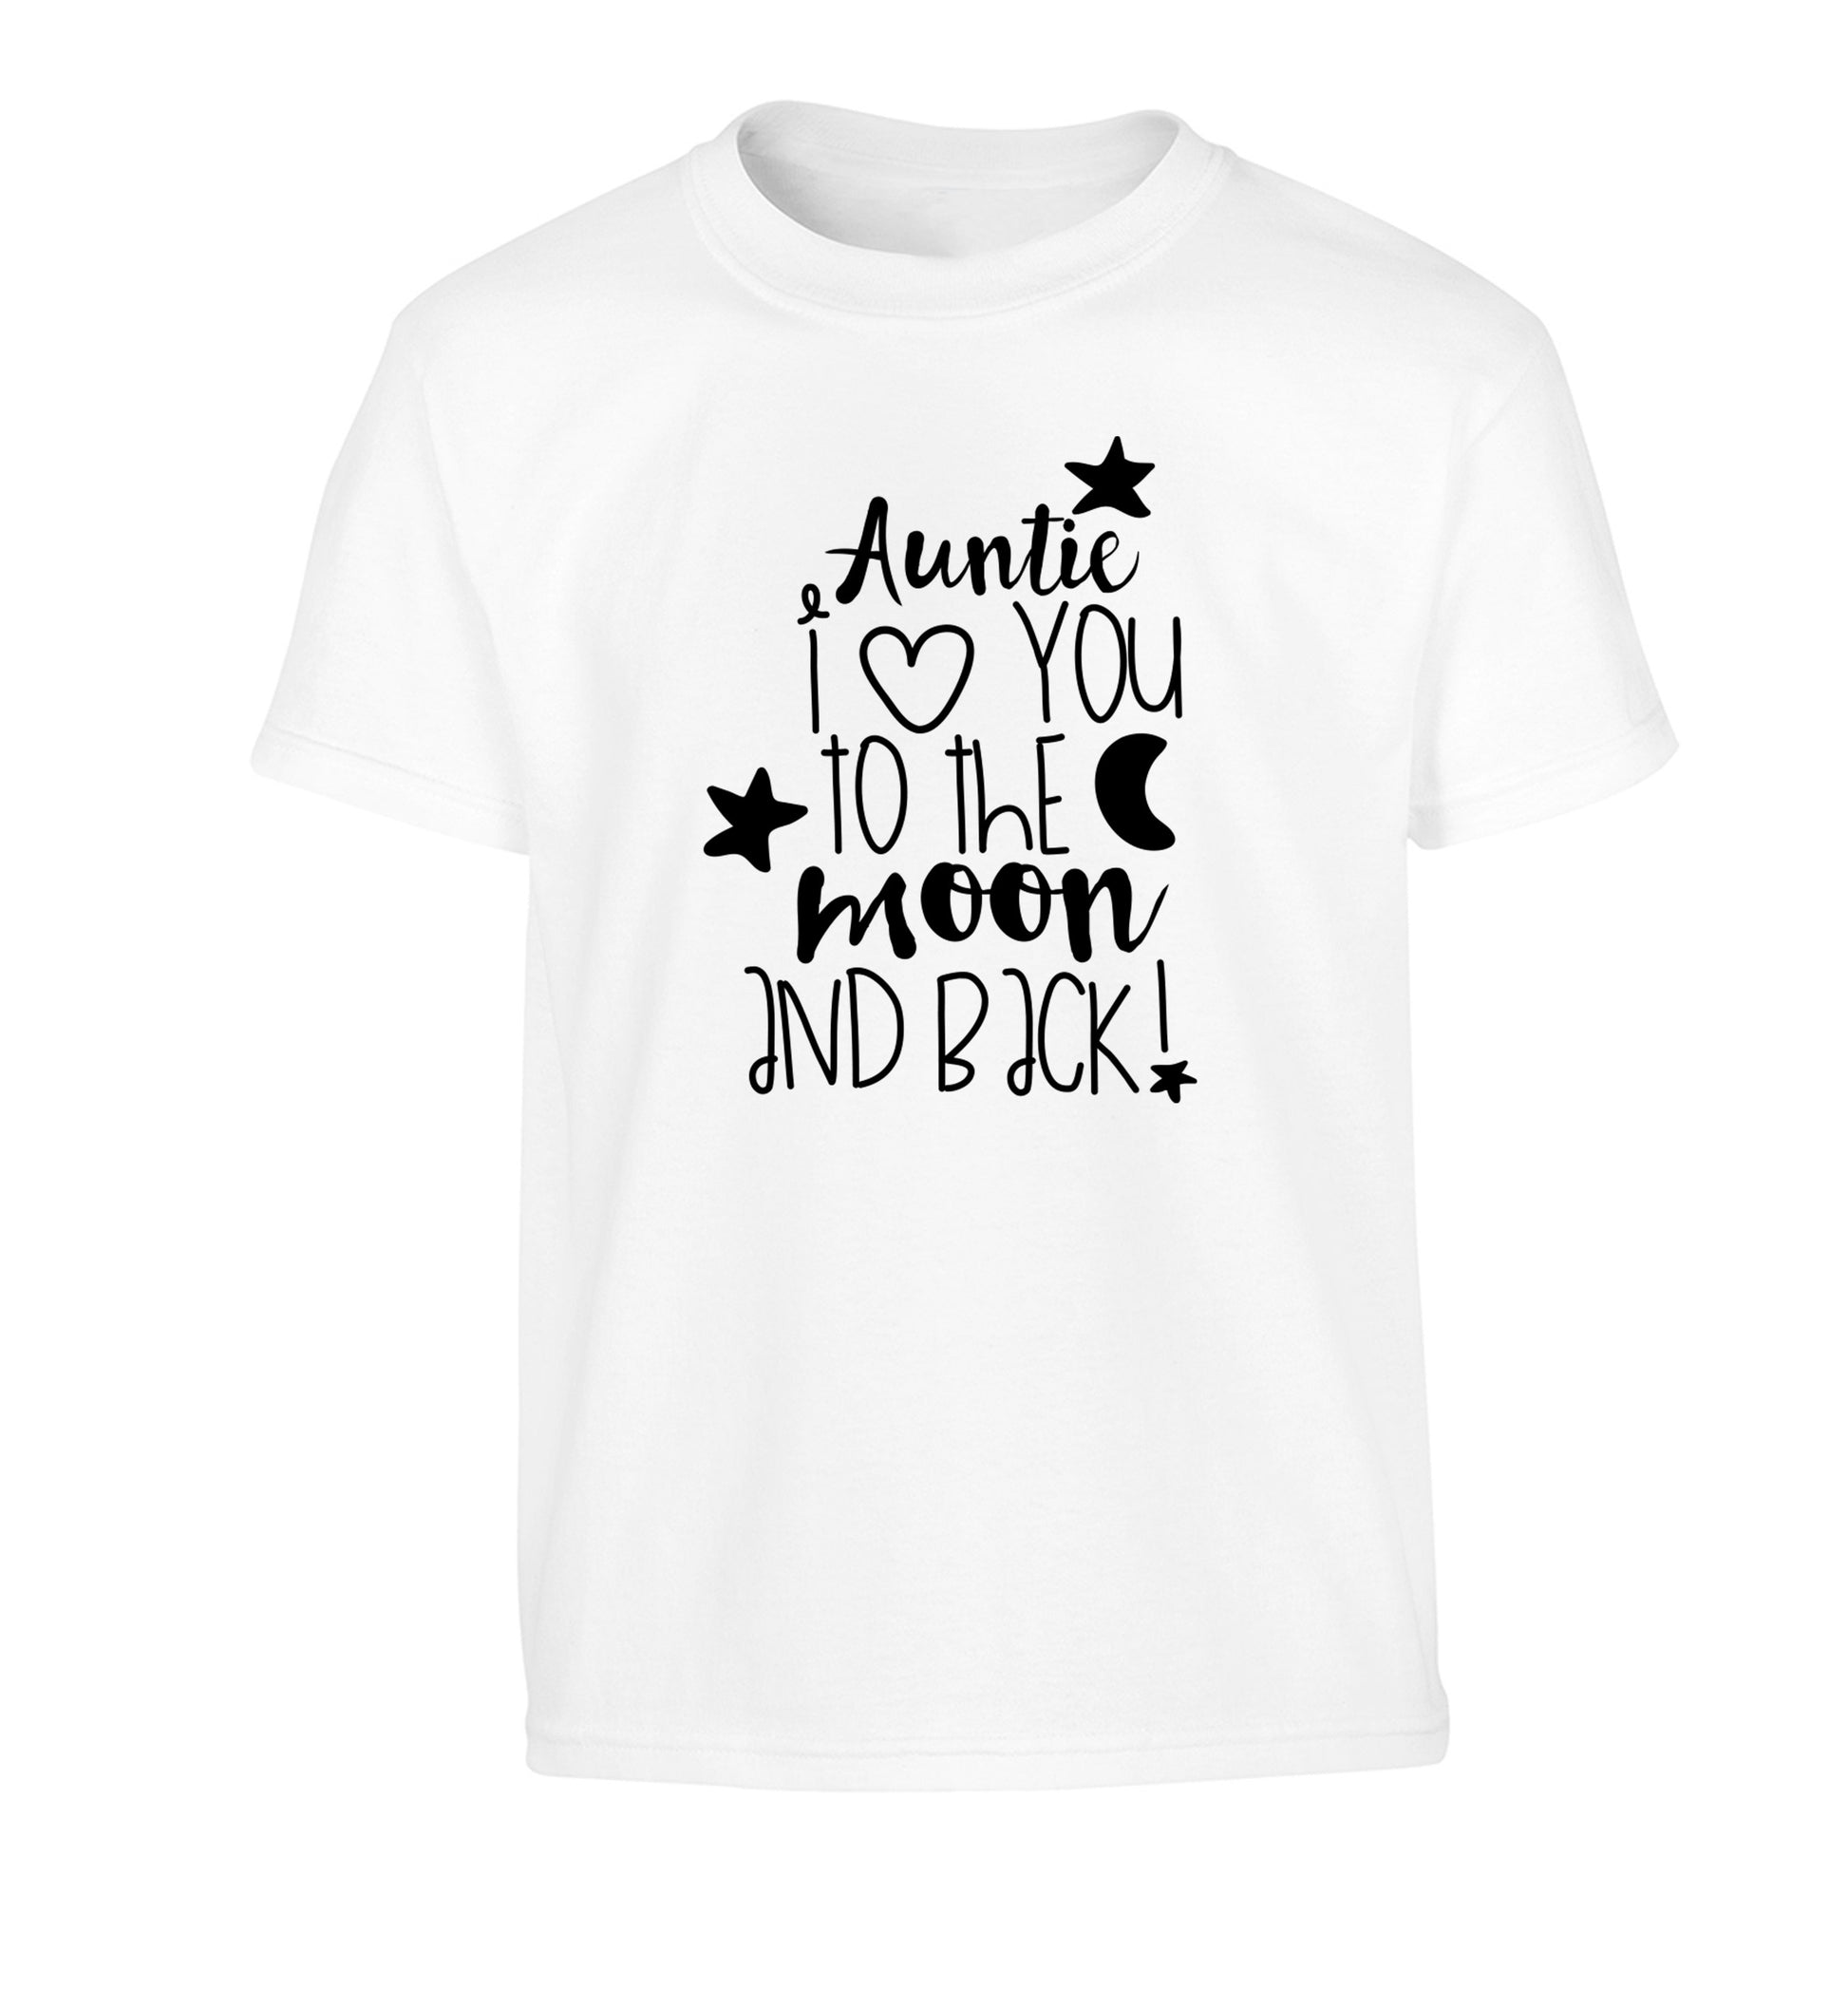 Auntie I love you to the moon and back Children's white Tshirt 12-14 Years